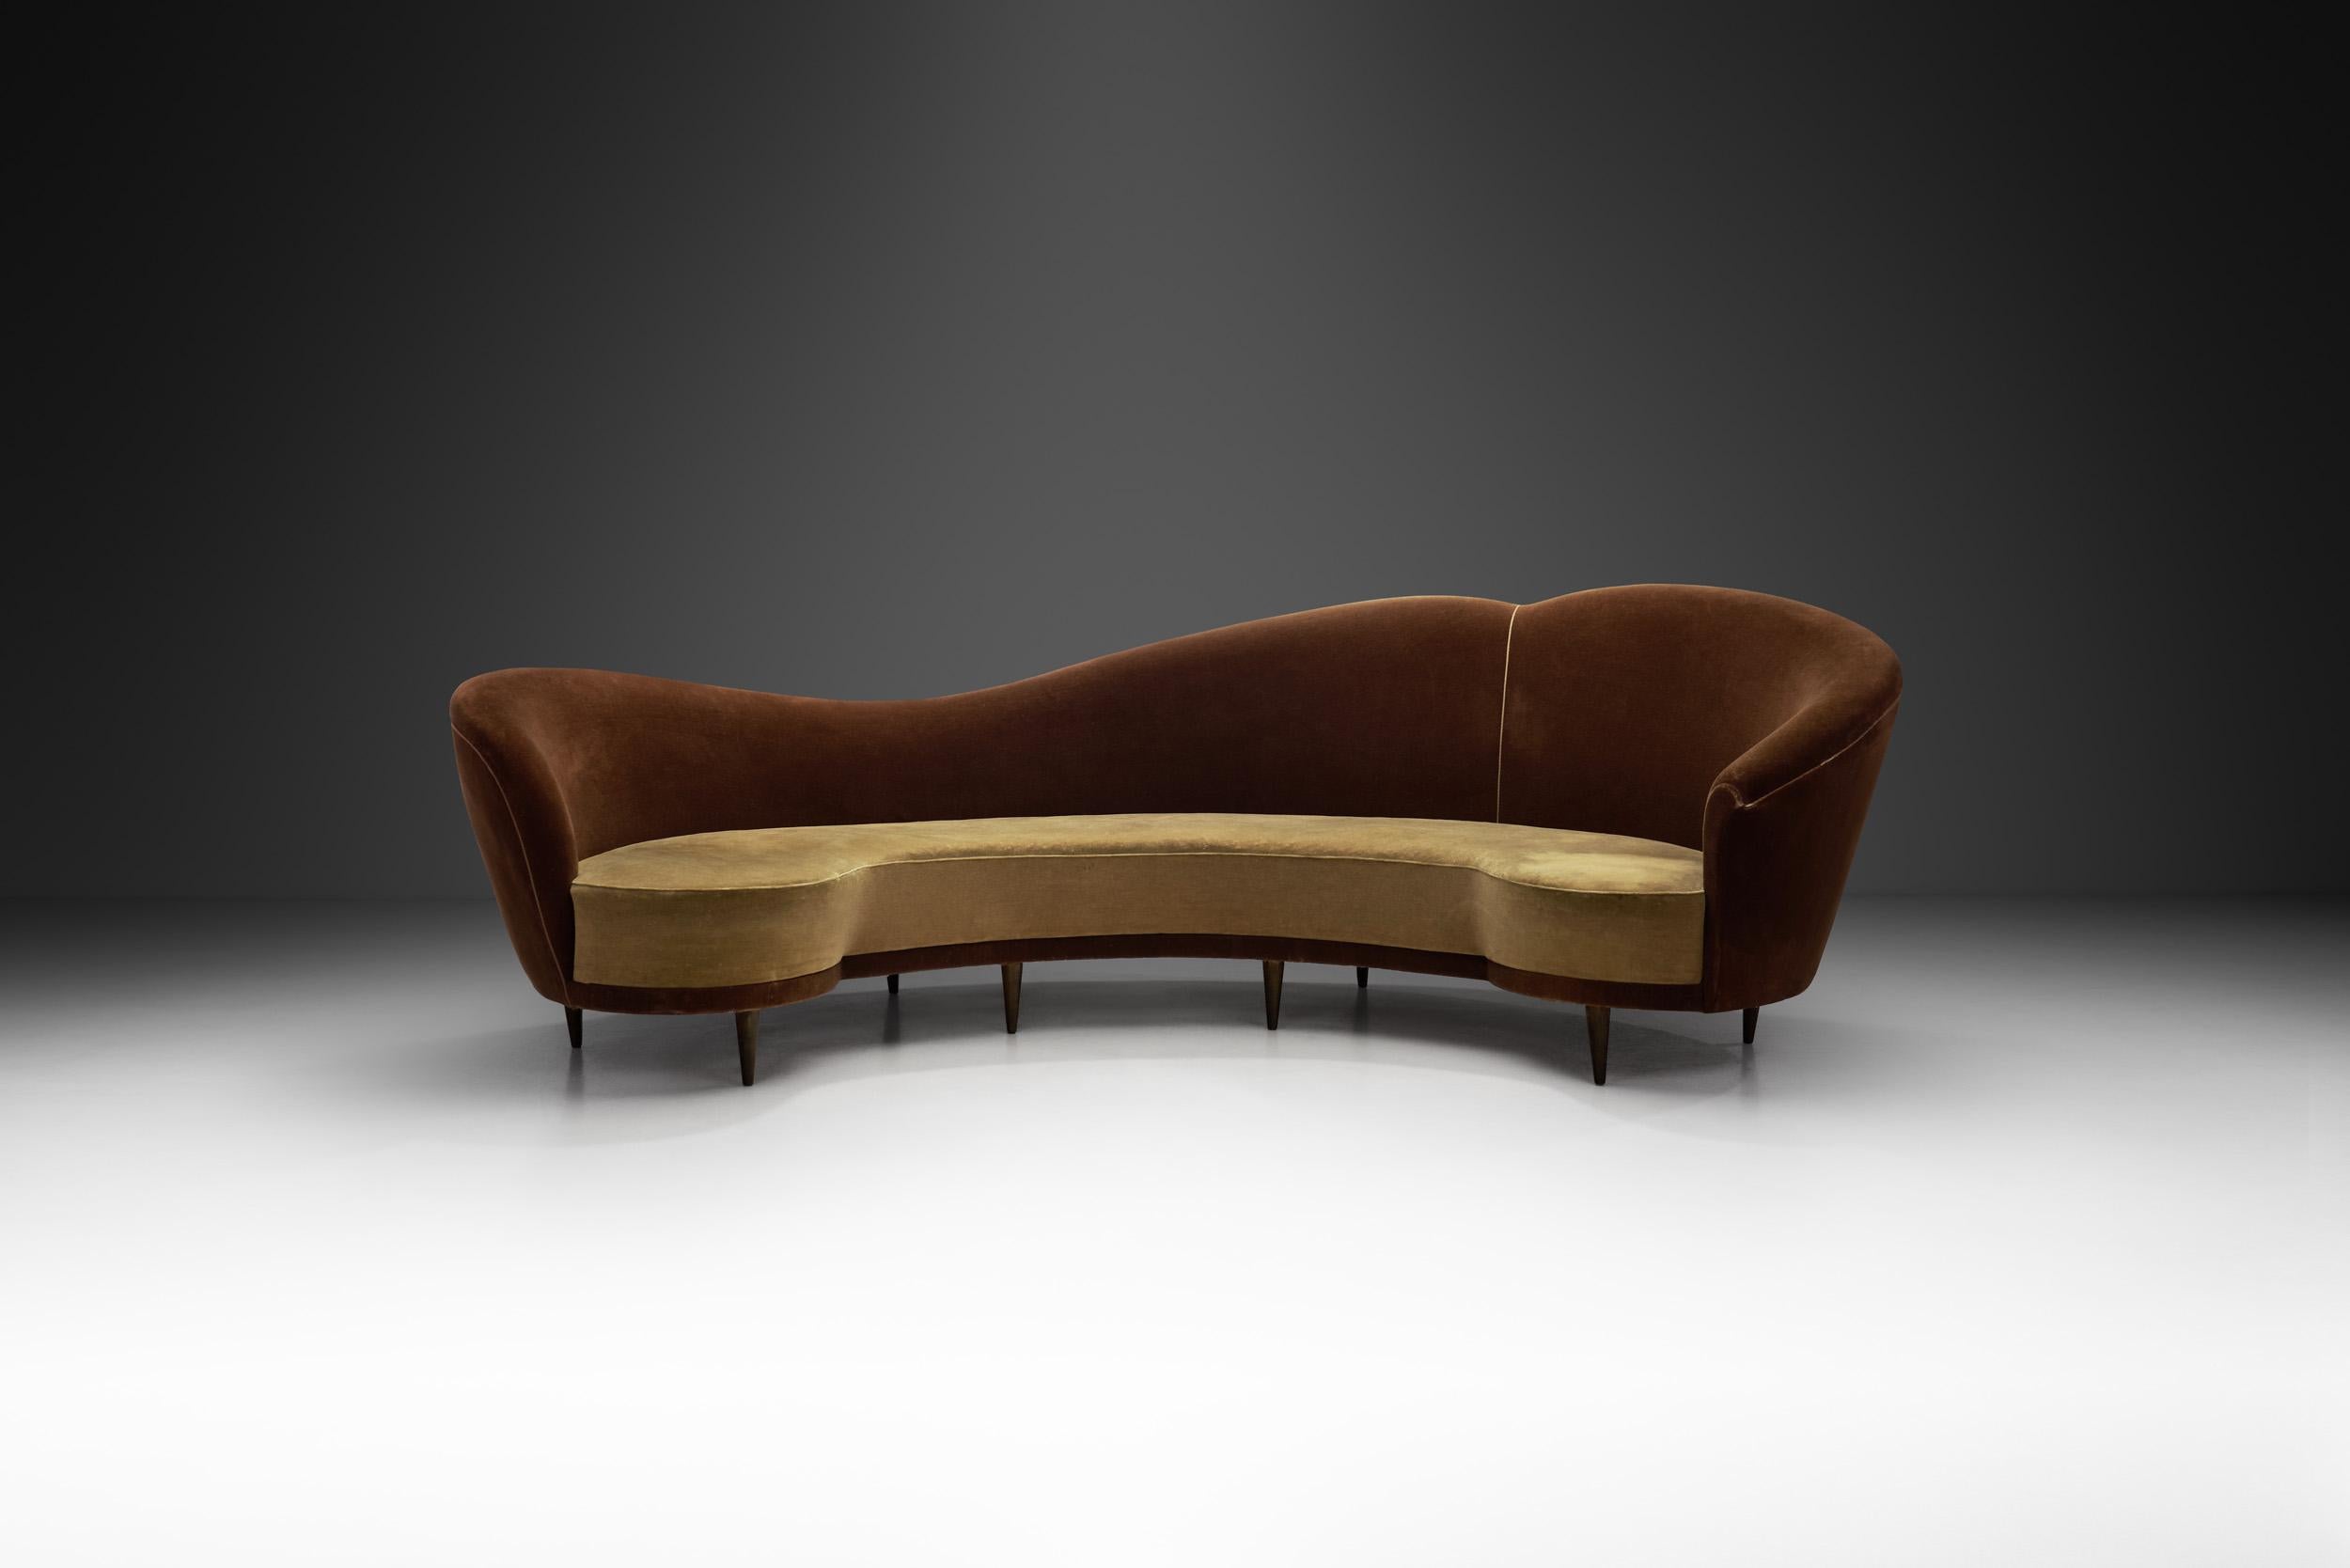 The variety and quality of Cesare Lacca's creations placed him high among the architect-designers leading the Modernist movement in Italy. As this sofa shows, the quality of his work provides all the decorative effectiveness needed without strain or